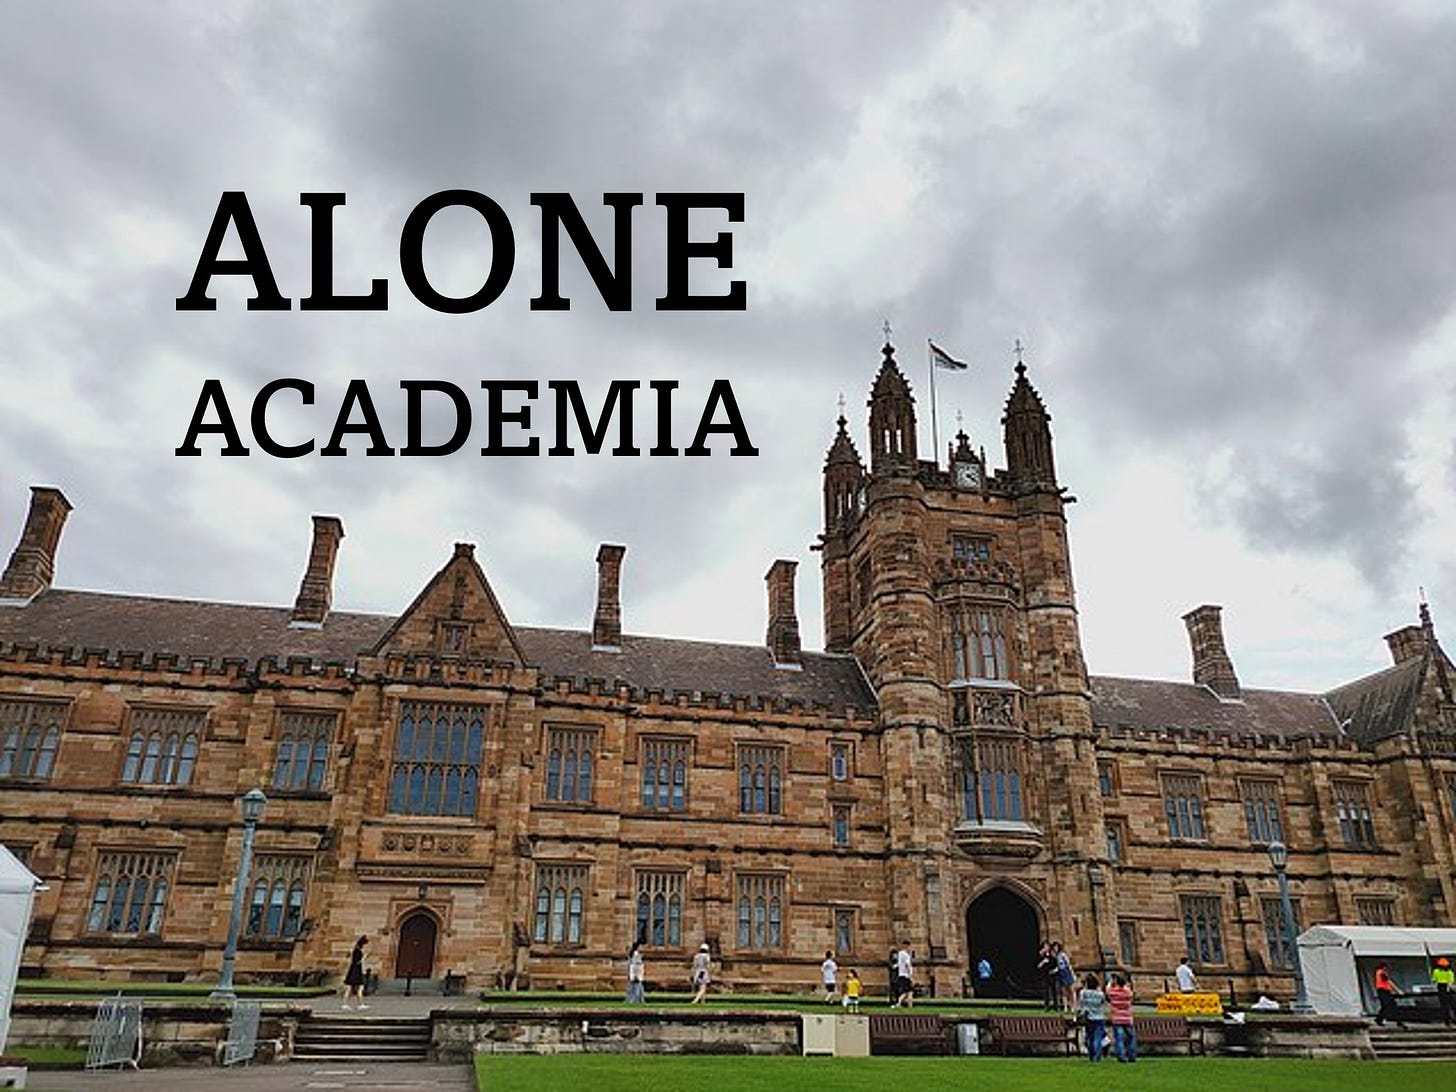 Image of ye olde university building with a cloudy sky behind it. The words Alone Academia are in large font over the sky